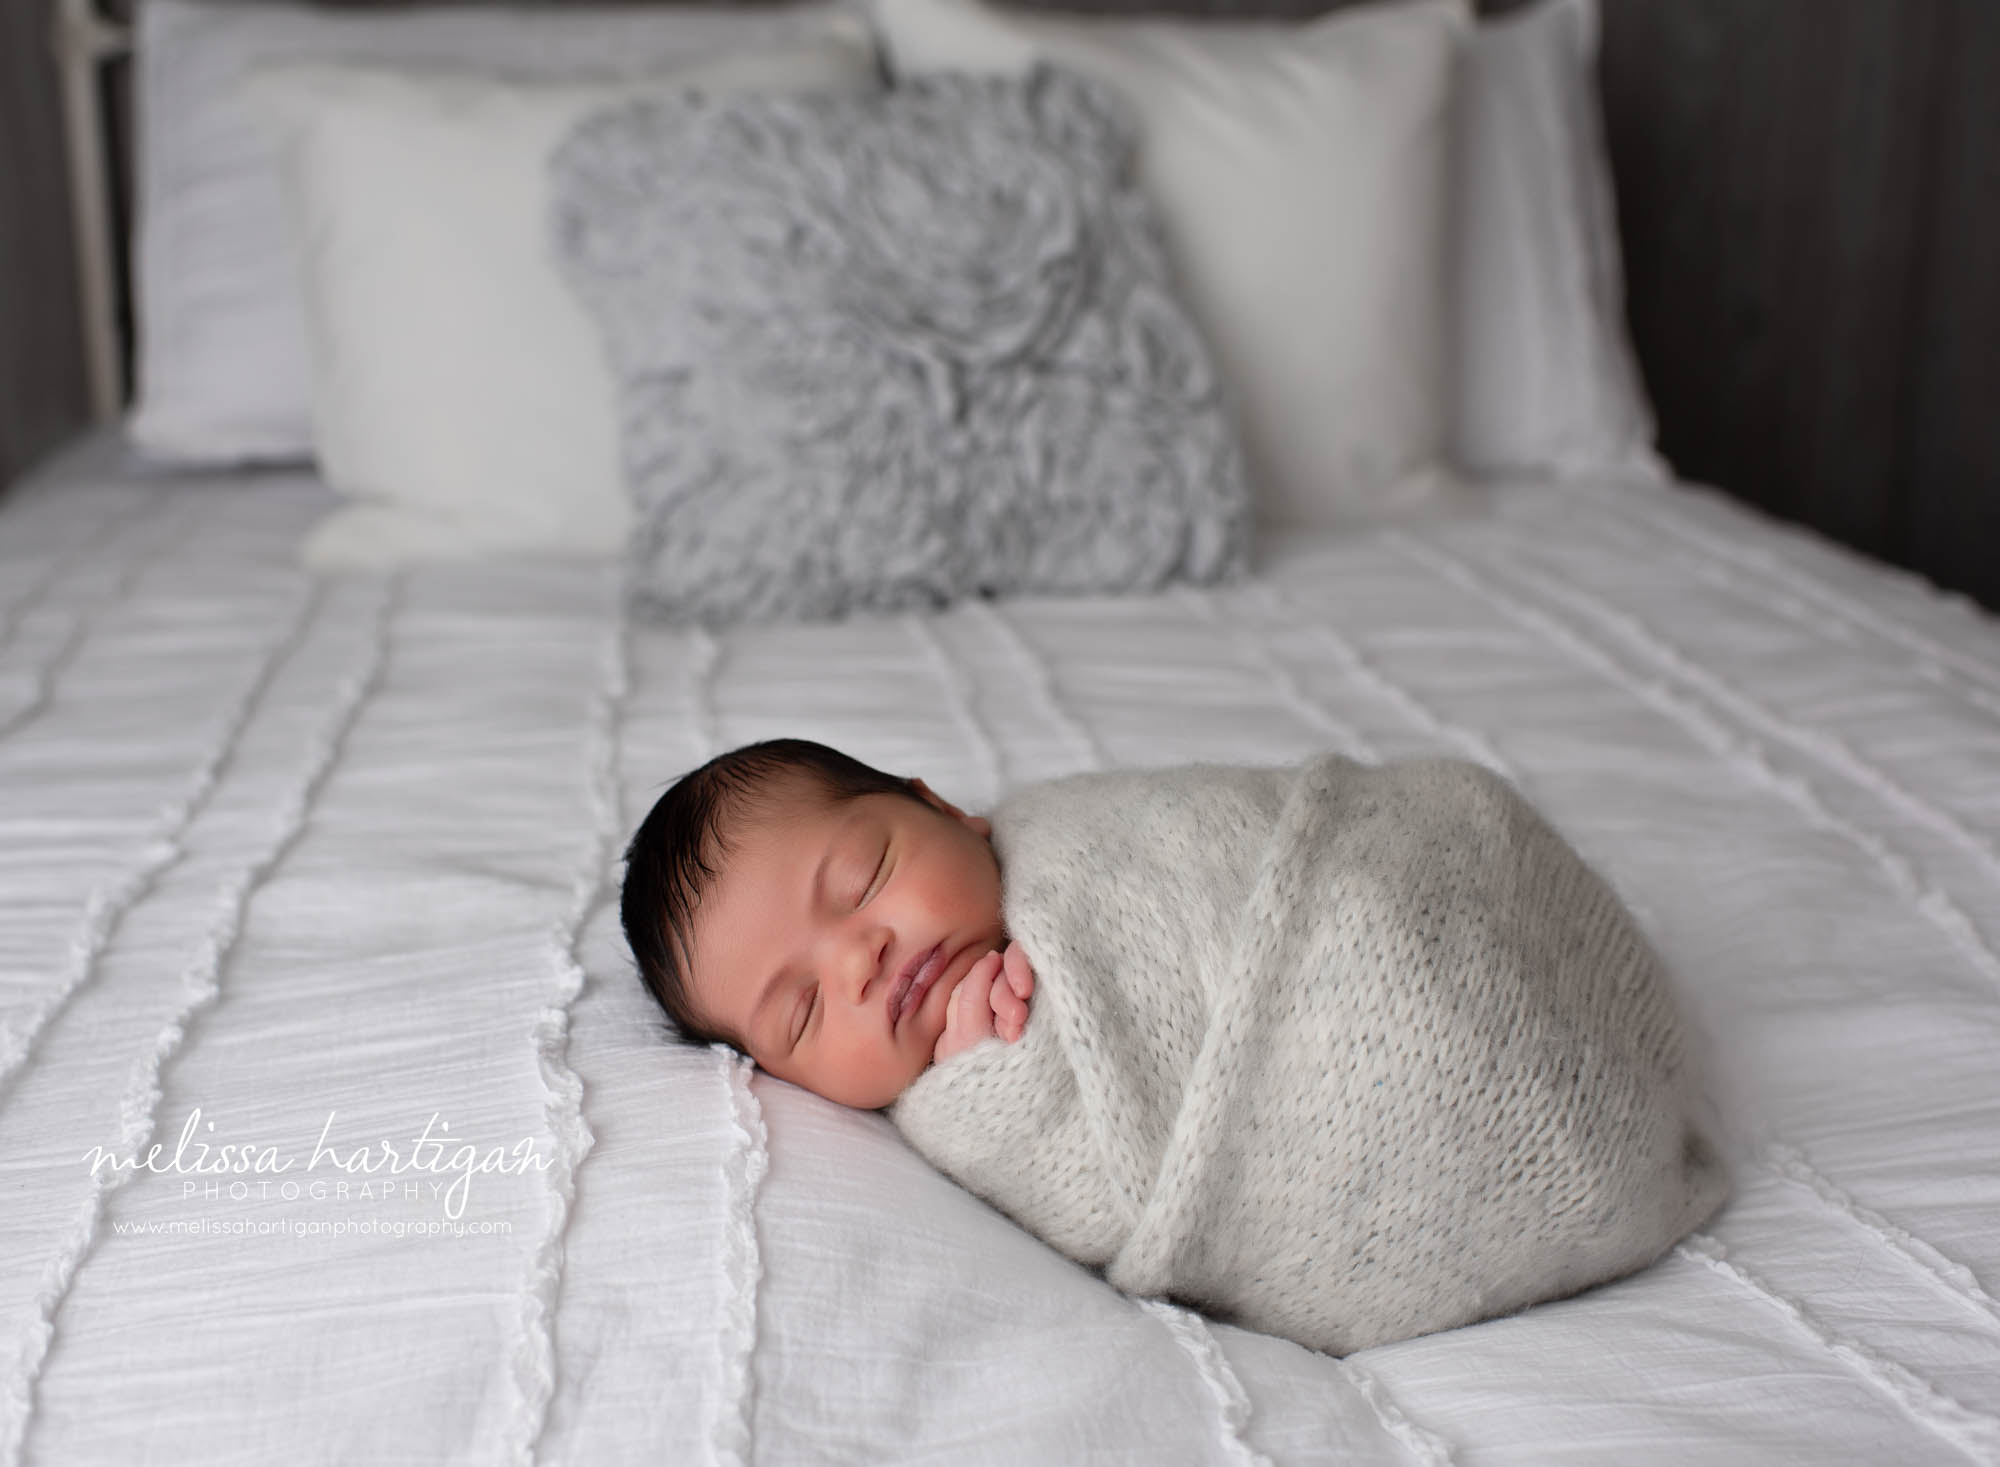 newborn baby boy posed on bed in knitted light gray wrap